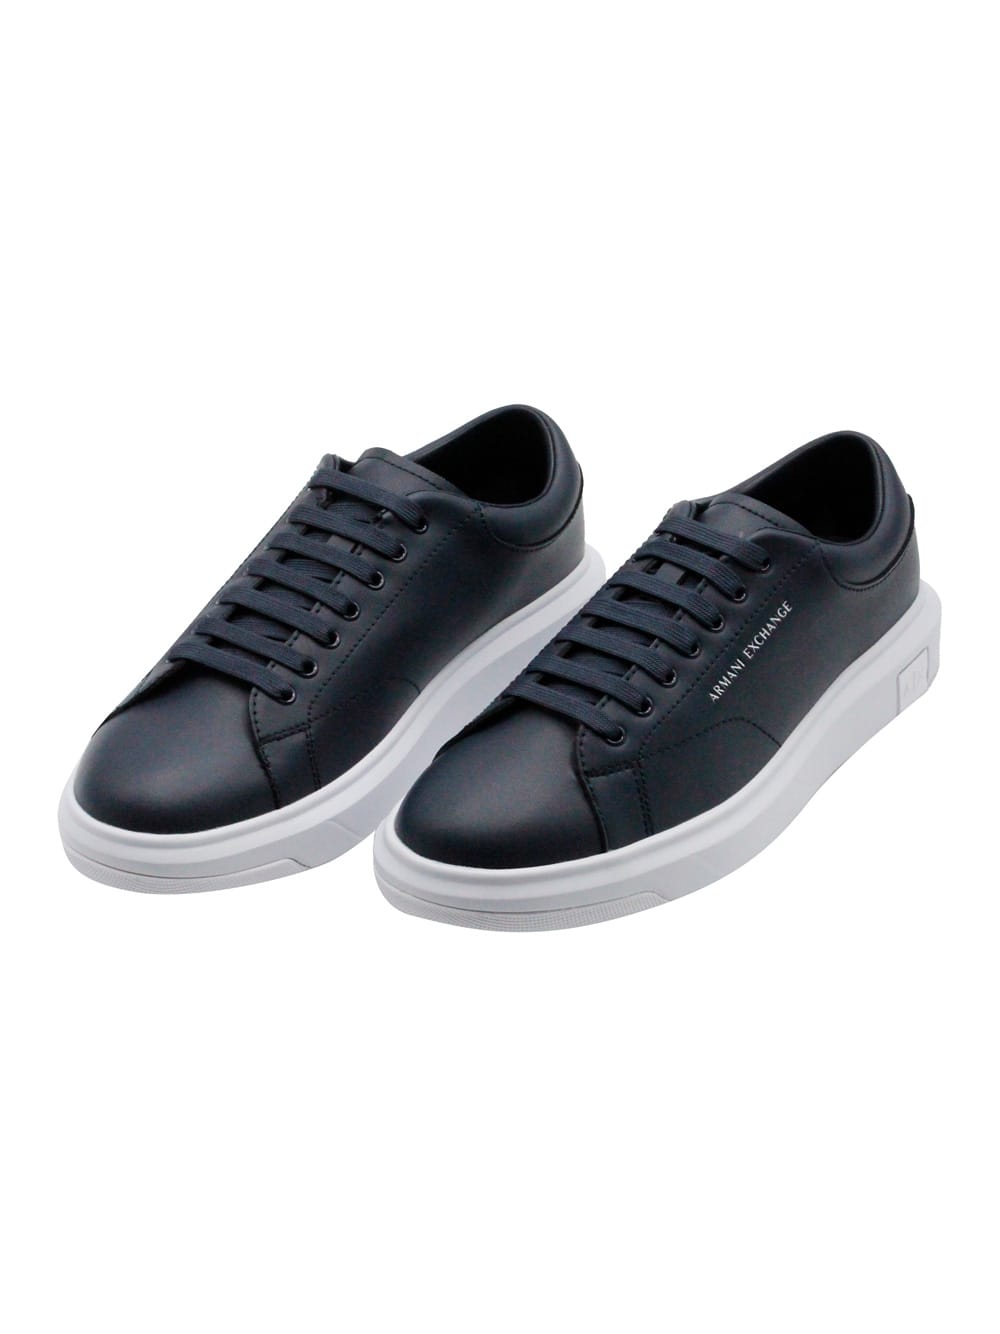 Shop Armani Collezioni Leather Sneakers With Matching Box Sole And Lace Closure. Small Logo On The Tongue And Back In Blu